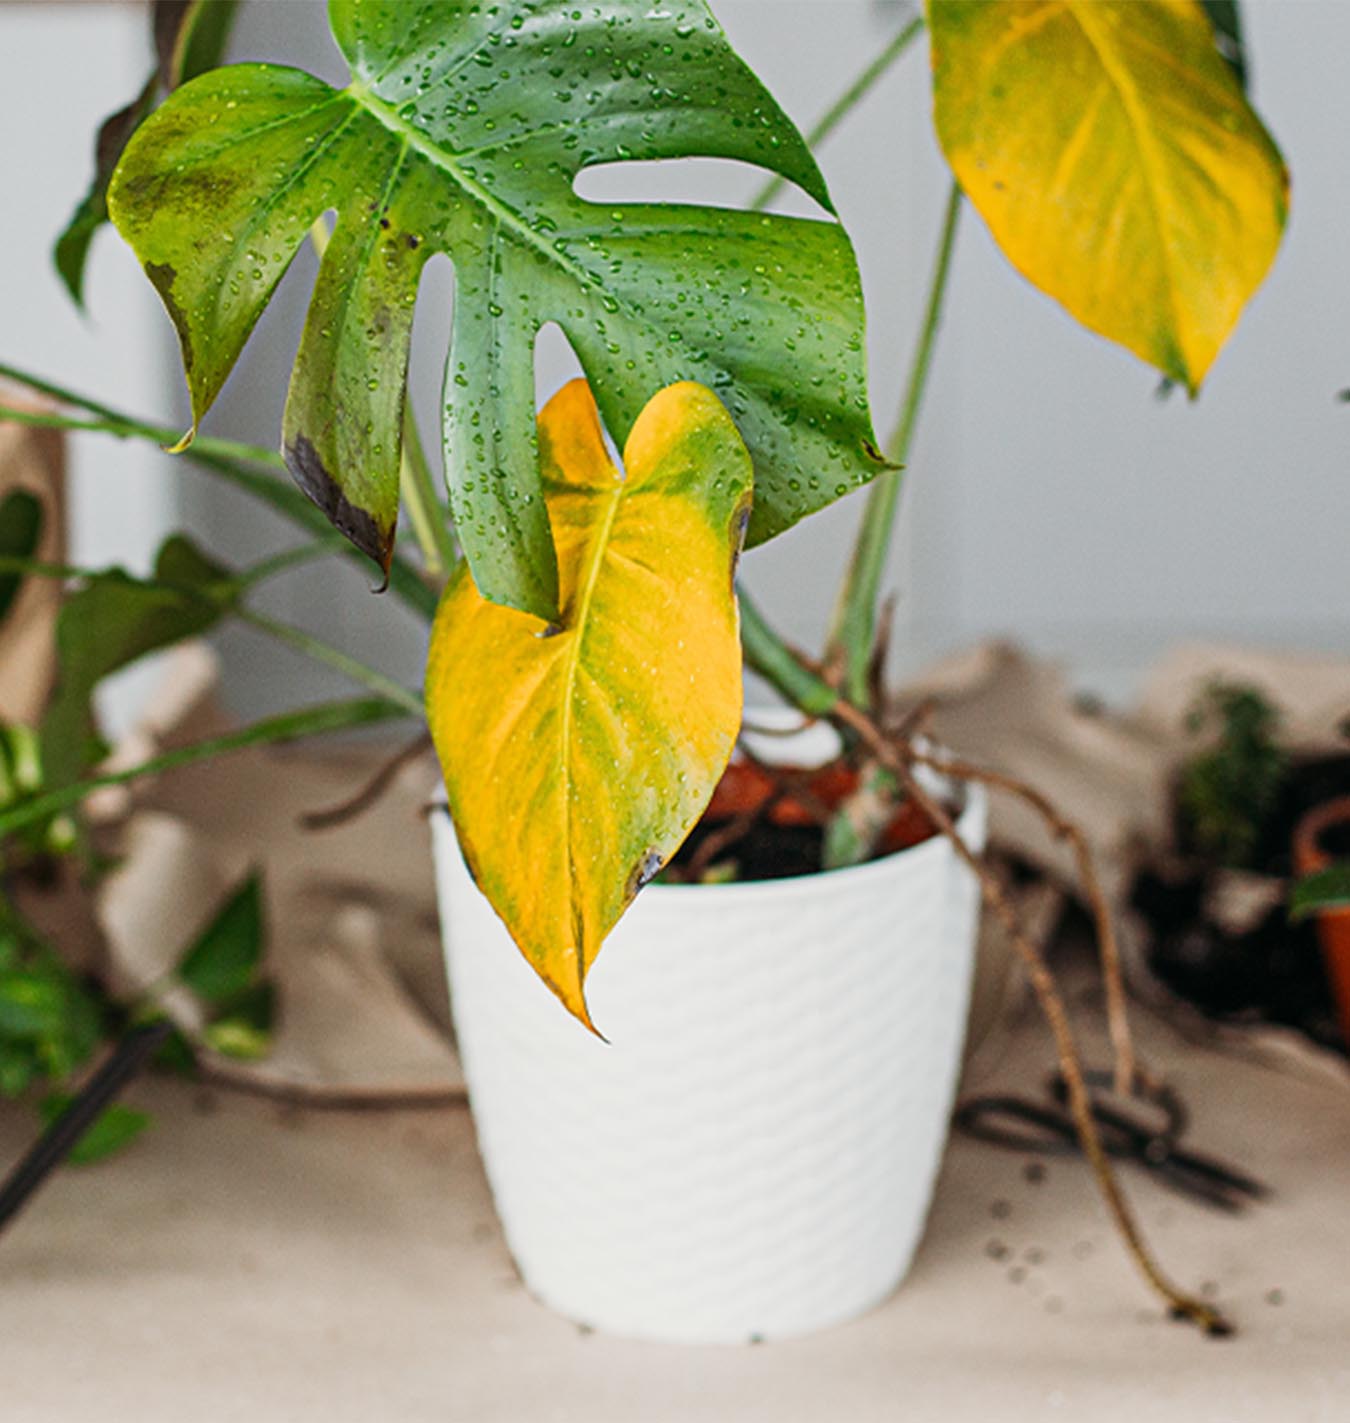 Treating the soil of your house plants before bringing indoors